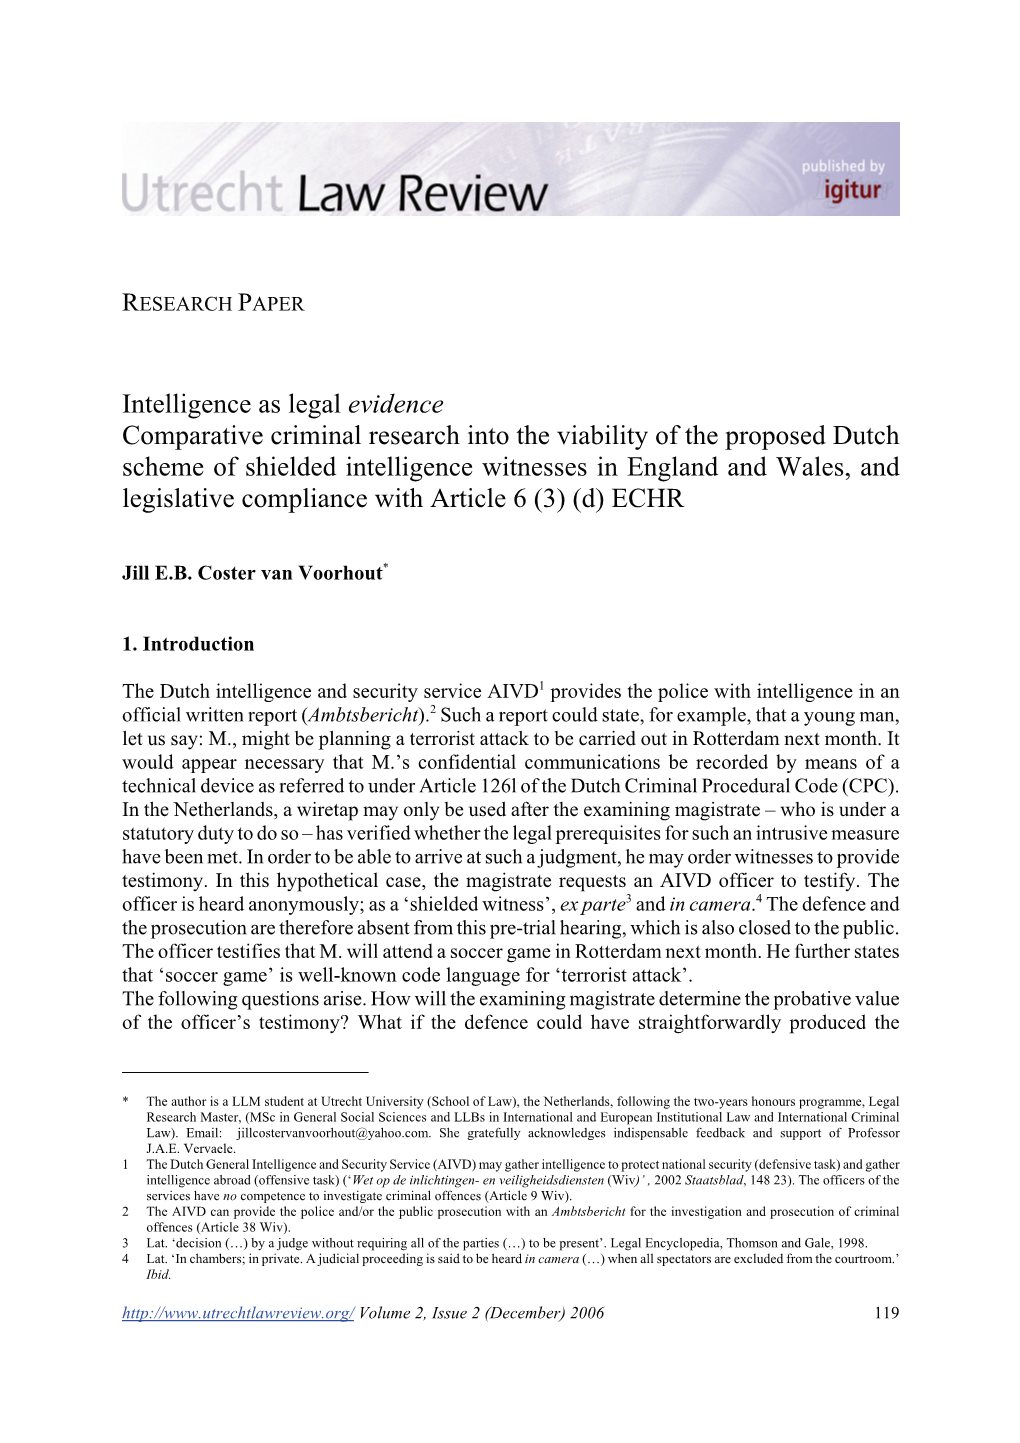 Intelligence As Legal Evidence Comparative Criminal Research Into the Viability of the Proposed Dutch Scheme of Shielded Intelli